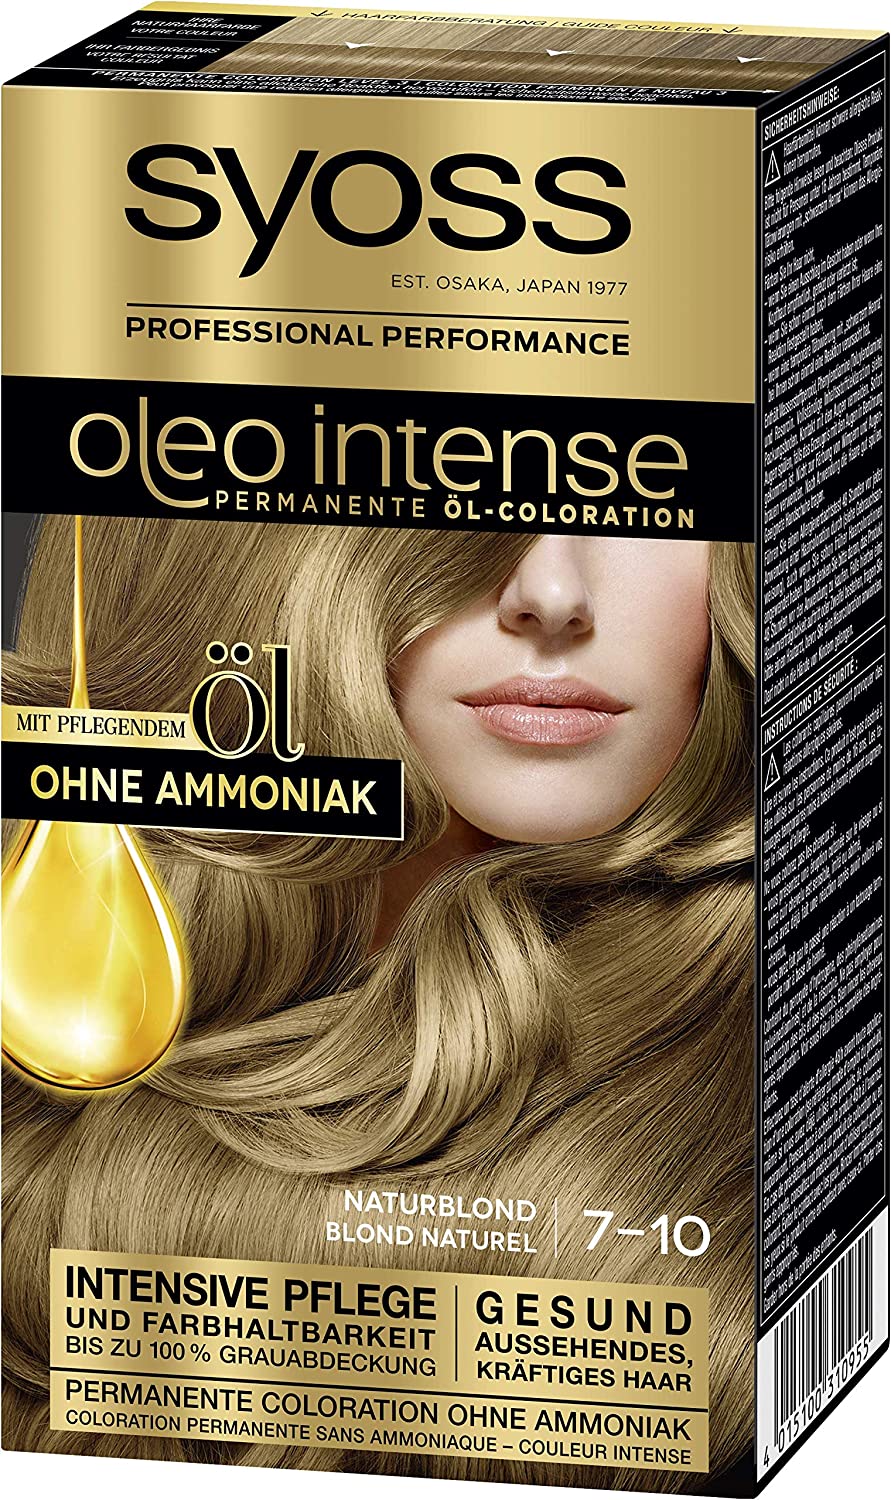 Syoss Oleo Intense Permanent Oil Colouration Hair Colour, 7-10 Natural Blonde with Nourishing Oil and Ammonia Free, Pack of 3 (3 x 115 ml), ‎natural